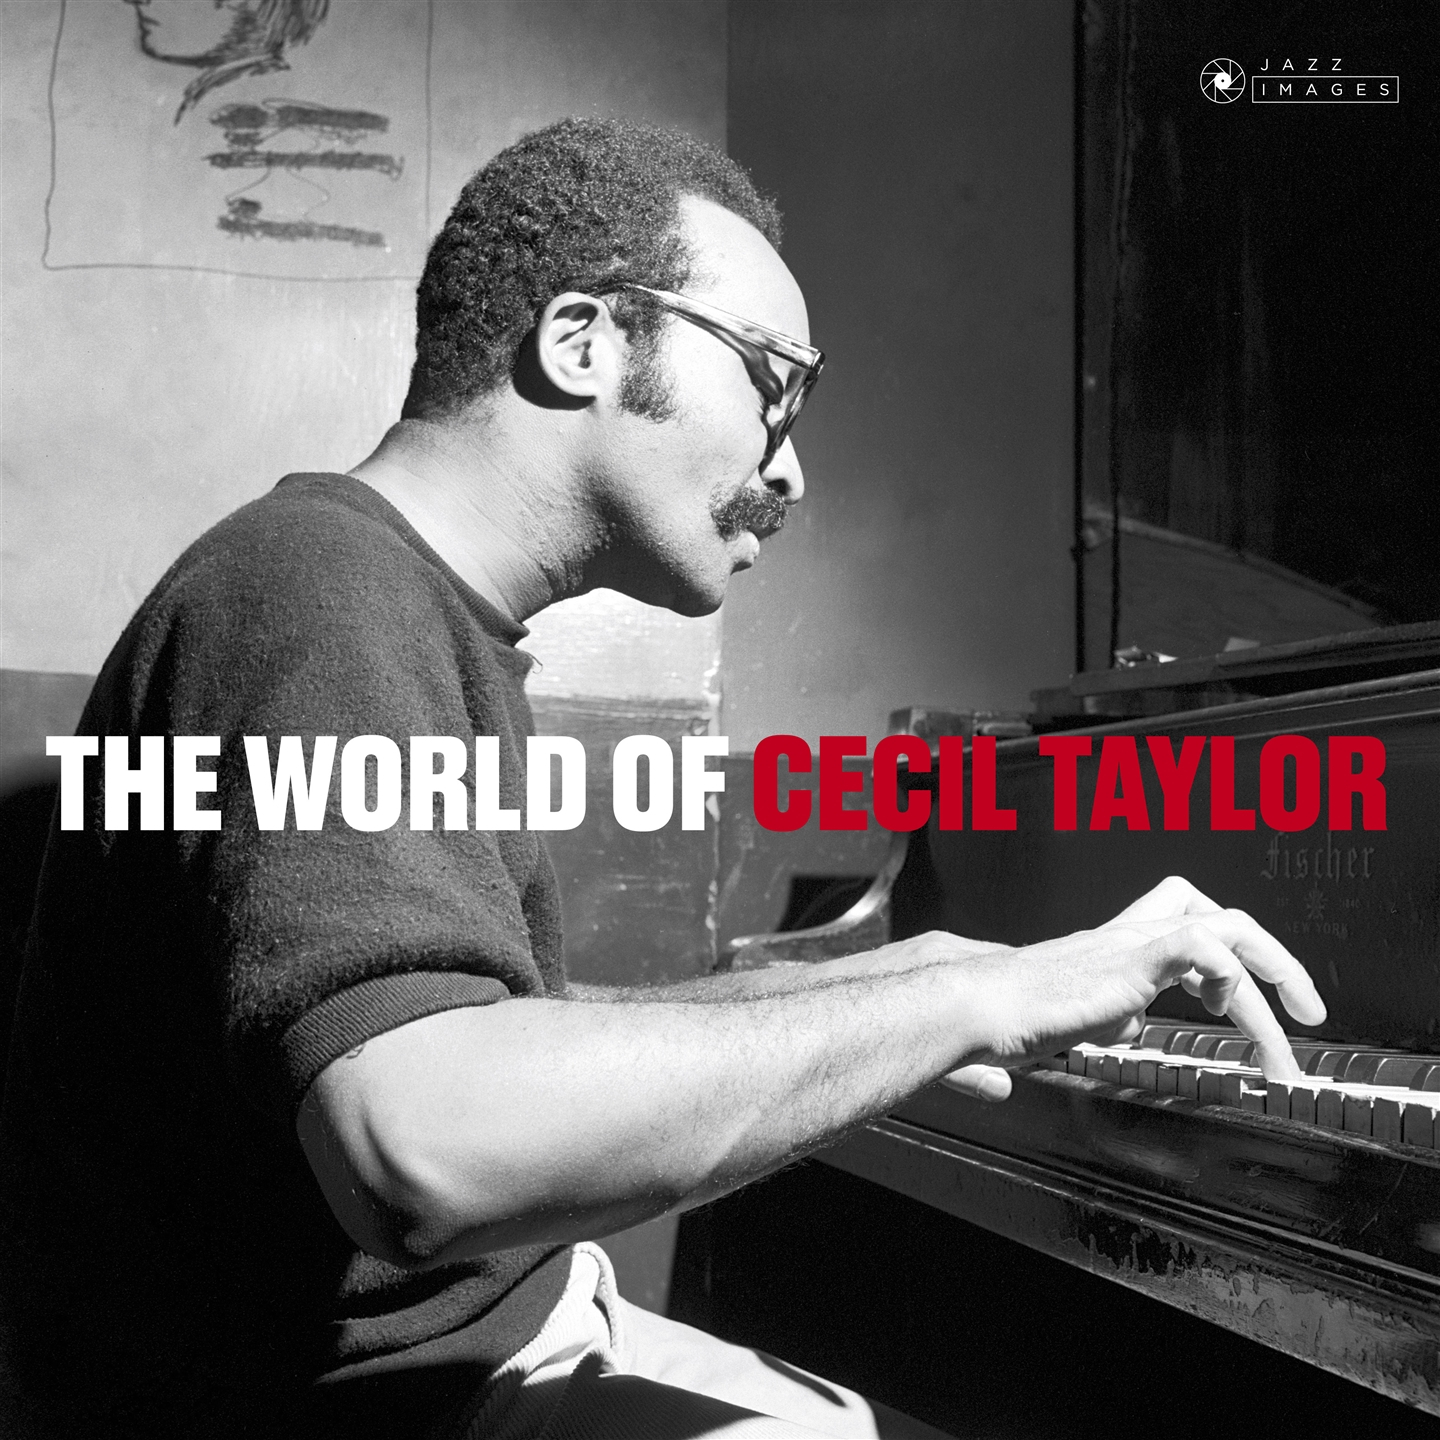 THE WORLD OF CECIL TAYLOR [GATEFOLD LP]